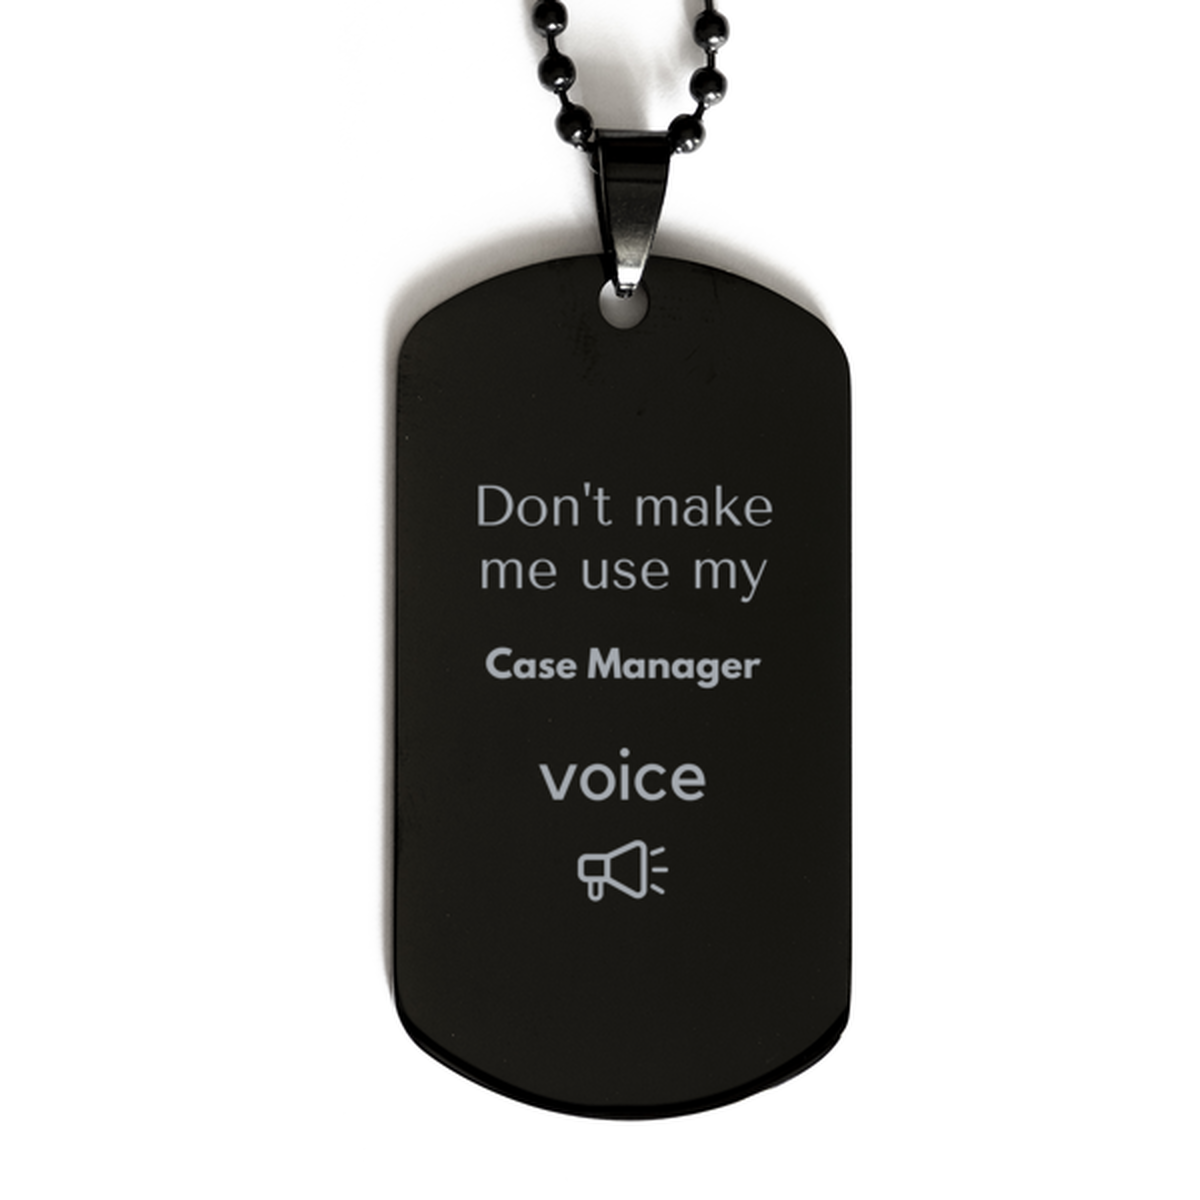 Don't make me use my Case Manager voice, Sarcasm Case Manager Gifts, Christmas Case Manager Black Dog Tag Birthday Unique Gifts For Case Manager Coworkers, Men, Women, Colleague, Friends